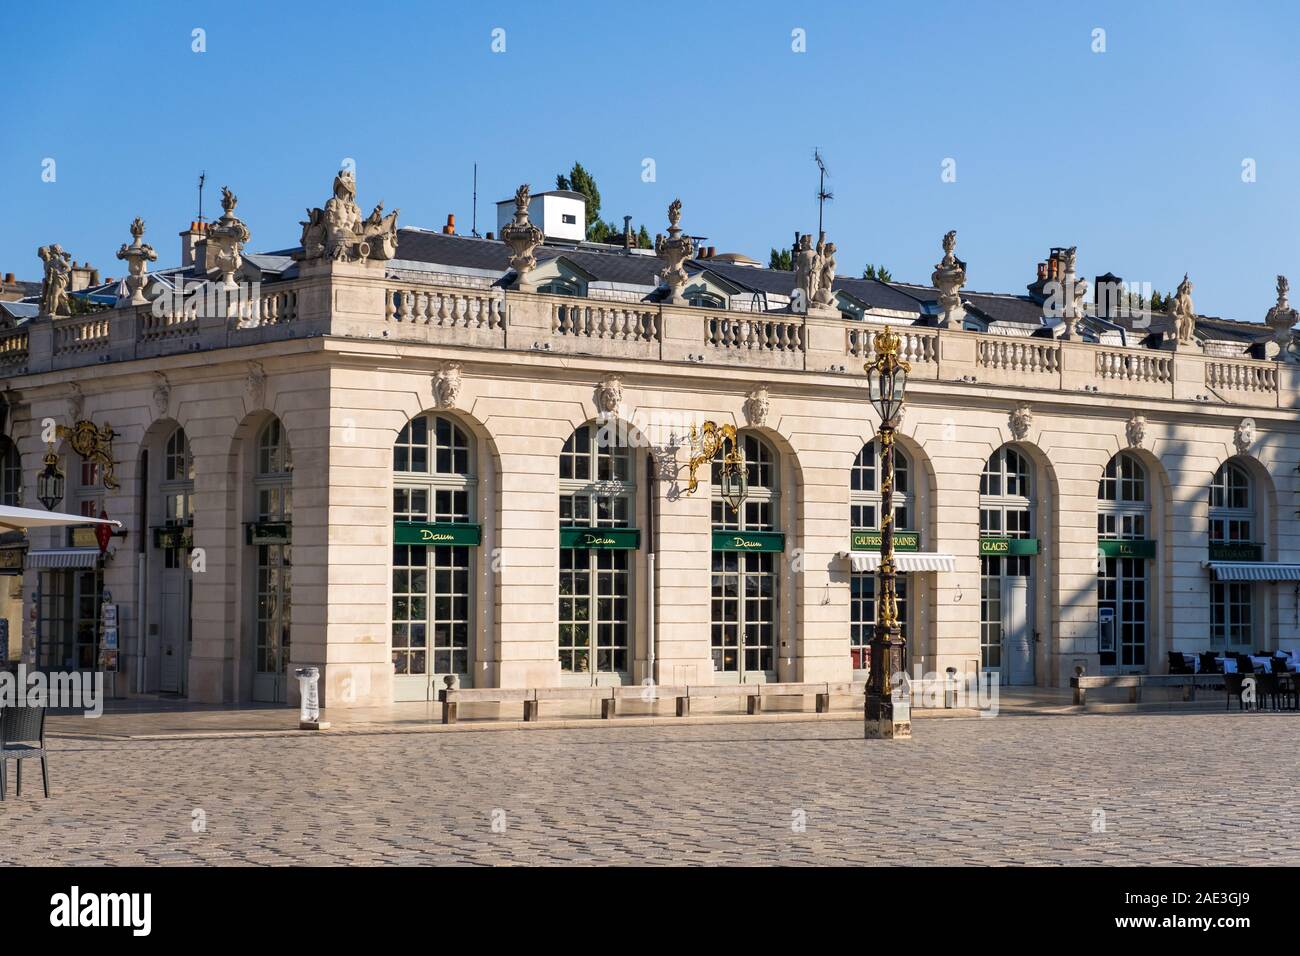 Nancy, France - August 31, 2019: The main square Place Stanislas in the centre of Nancy, Lorraine Stock Photo